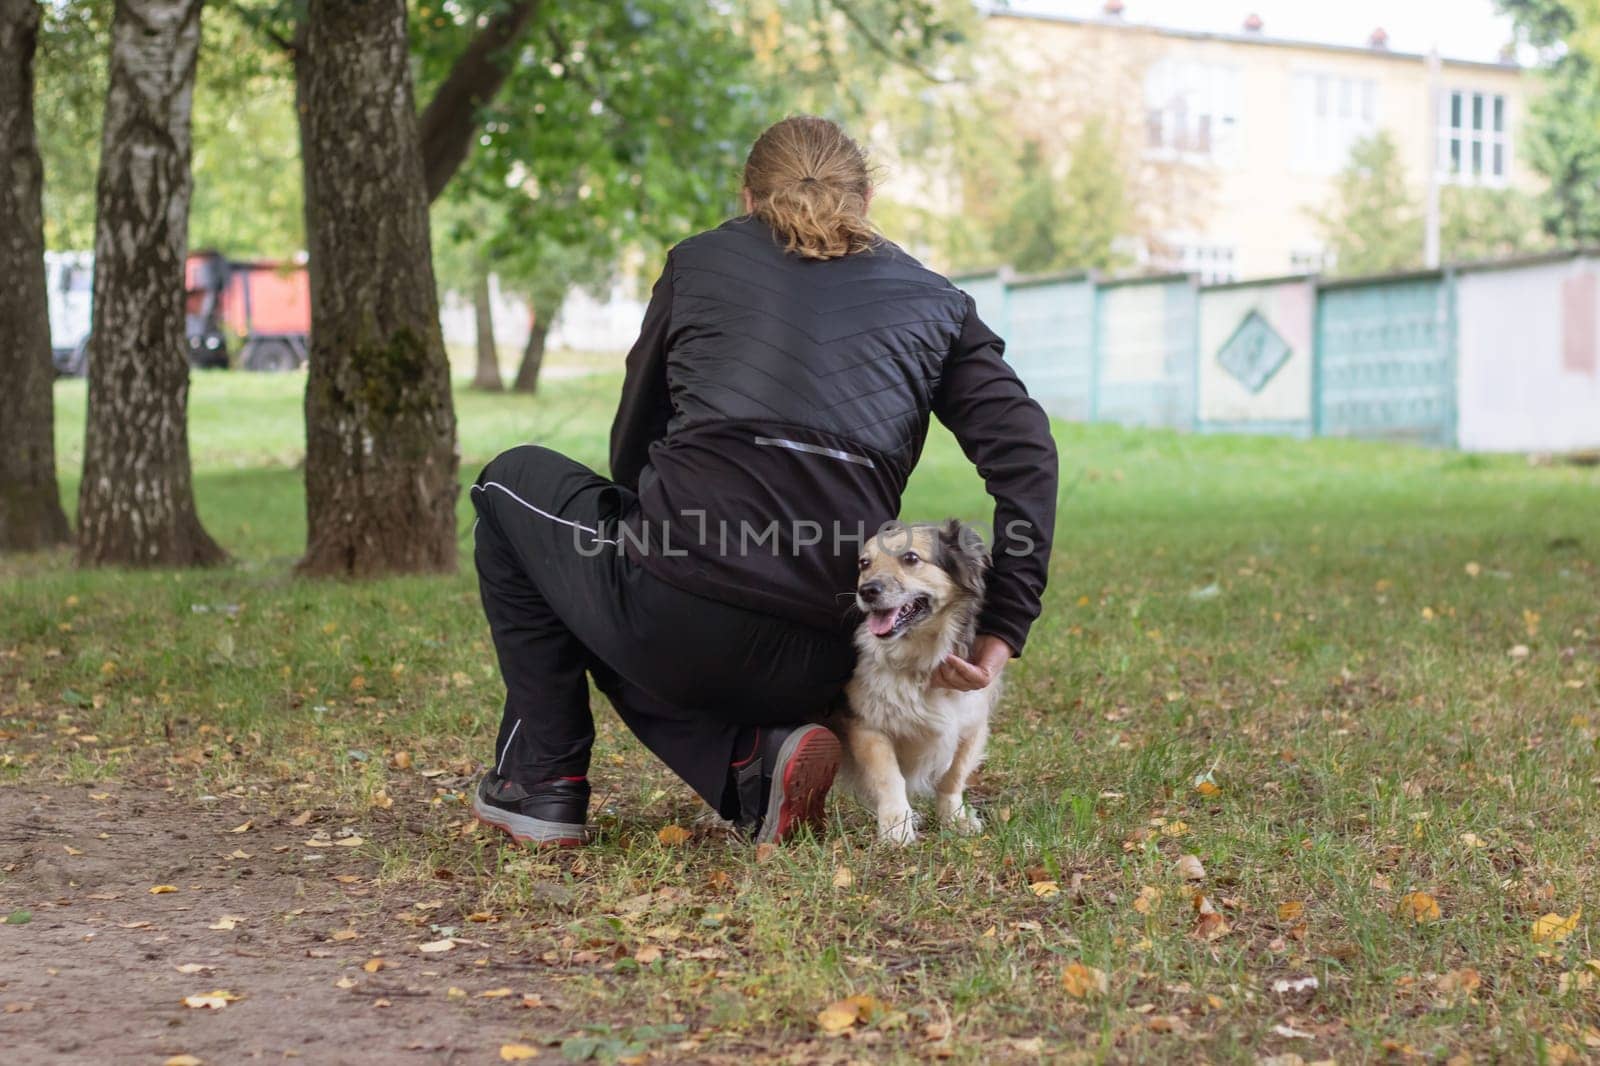 Man and dog walking in autumn park close up